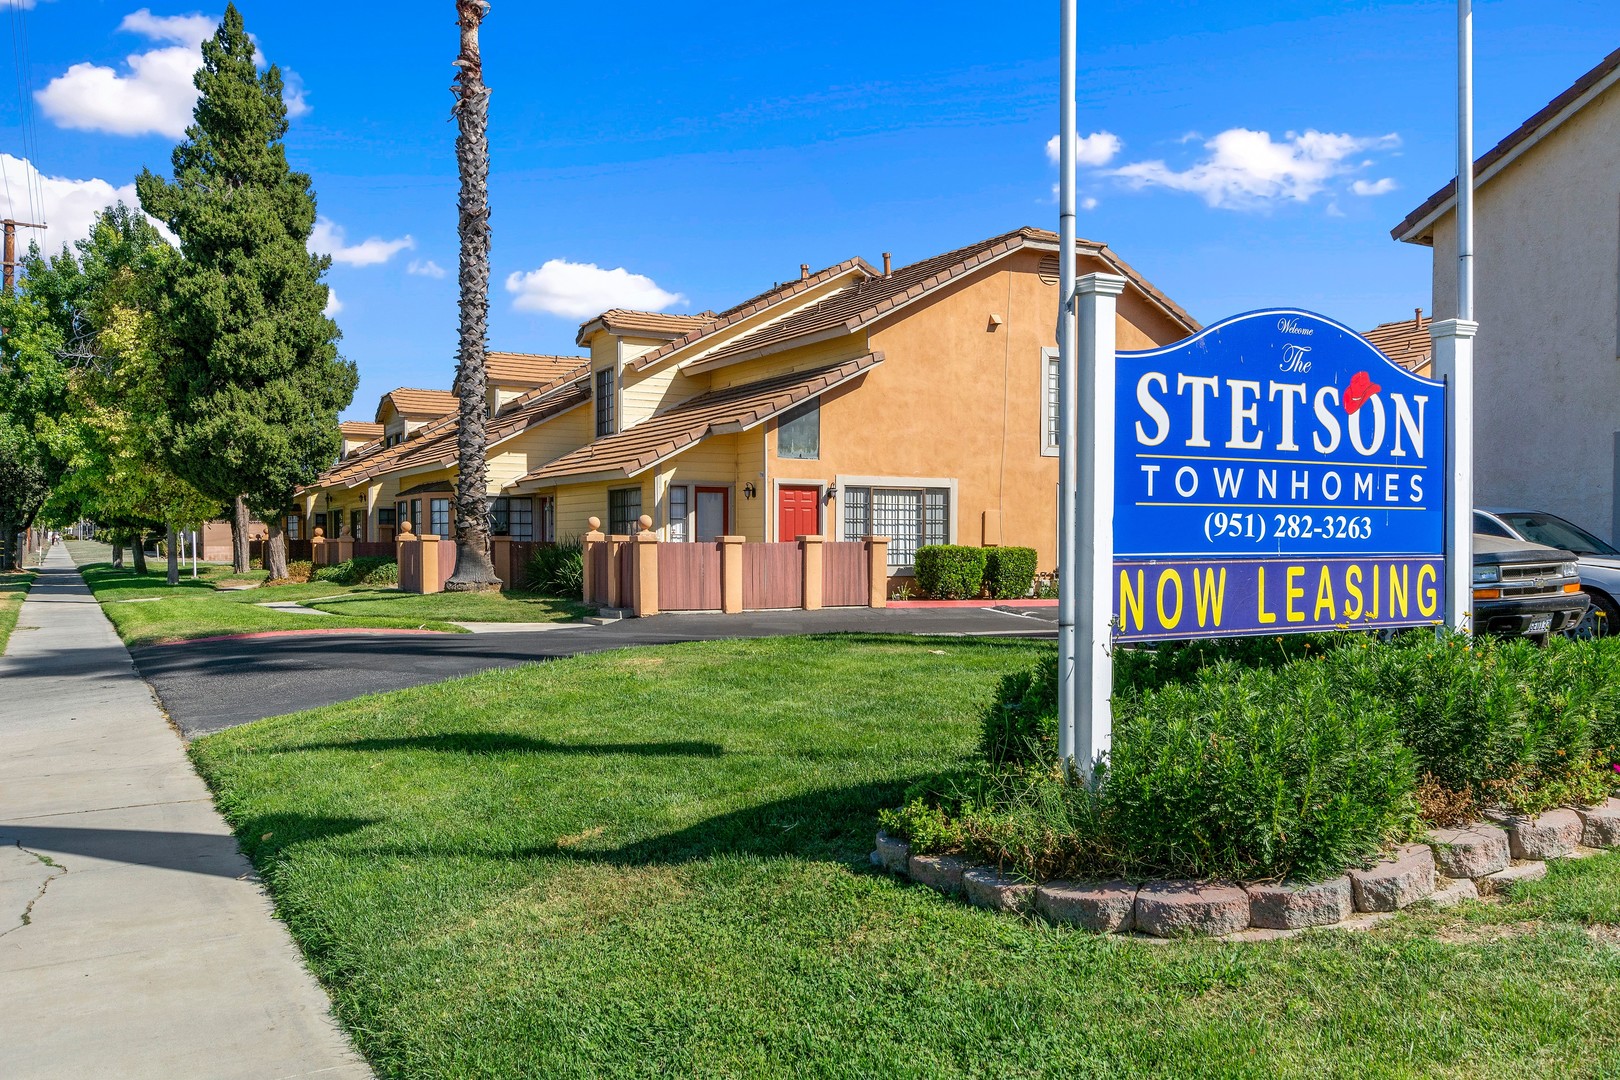 Stetson Townhomes